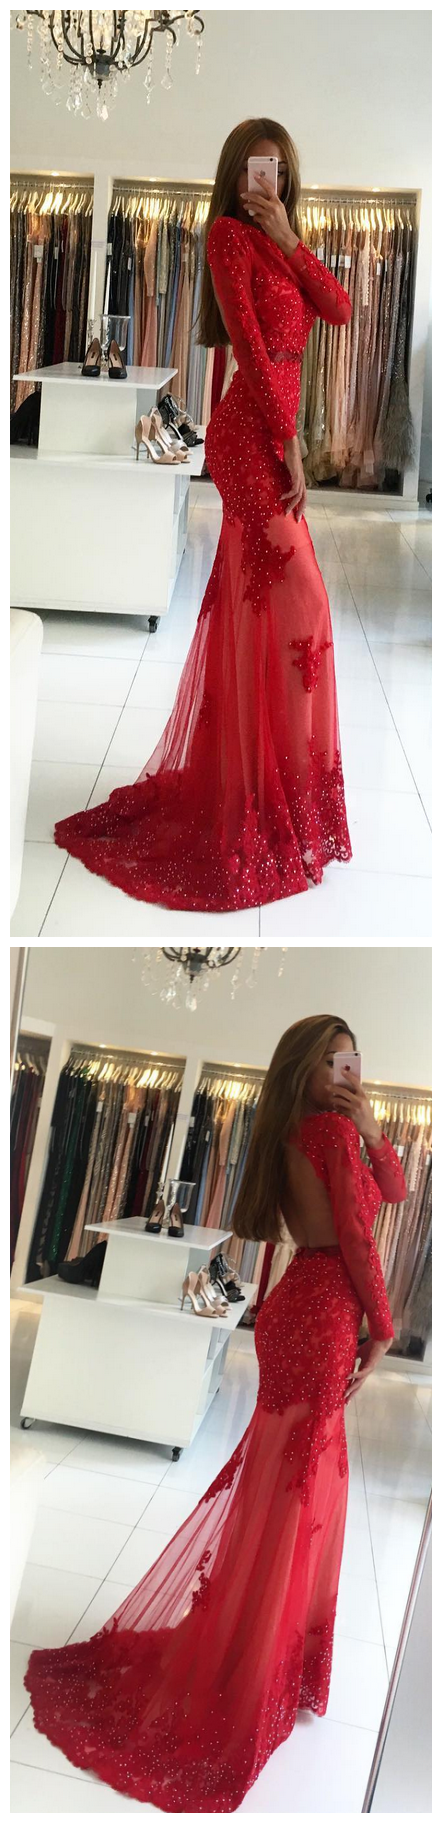 Chraming Red Beaded Tulle Mermaid Prom Dress With Long Sleeve Plus Size Women Prom Gowns ,red Formal Evening Dress, Sexy Mermaid Prom Gowns